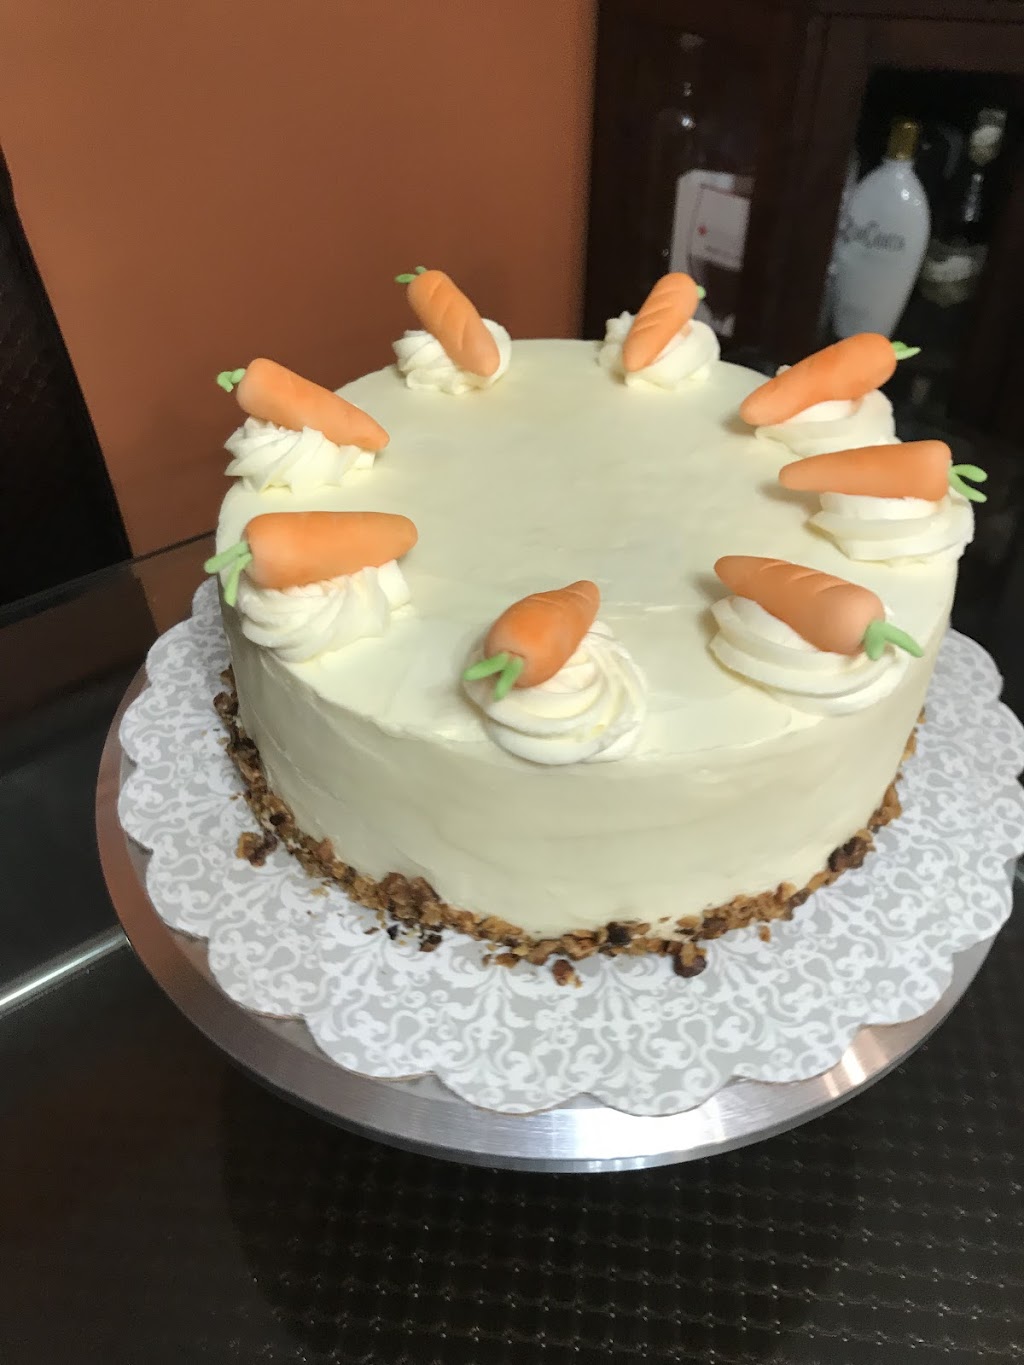 Lupita’s Cakes and Patisserie | 395 Hempstead Gardens Dr, West Hempstead, NY 11552 | Phone: (516) 243-9936